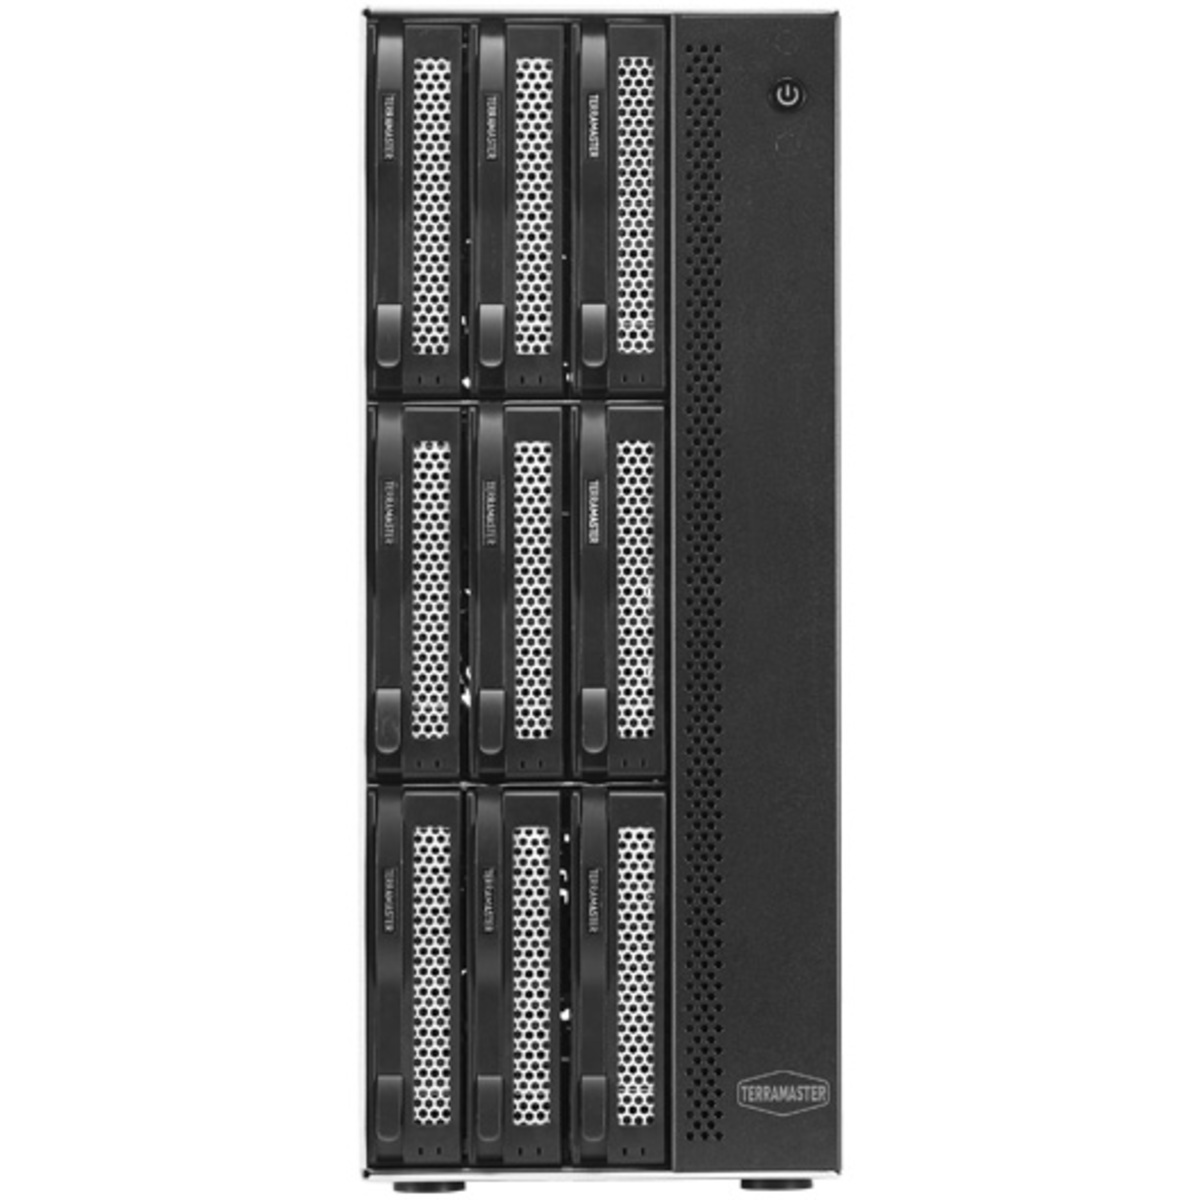 TerraMaster T9-450 144tb 9-Bay Desktop Multimedia / Power User / Business NAS - Network Attached Storage Device 6x24tb Western Digital Ultrastar HC580 WUH722424ALE6L4 3.5 7200rpm SATA 6Gb/s HDD ENTERPRISE Class Drives Installed - Burn-In Tested T9-450